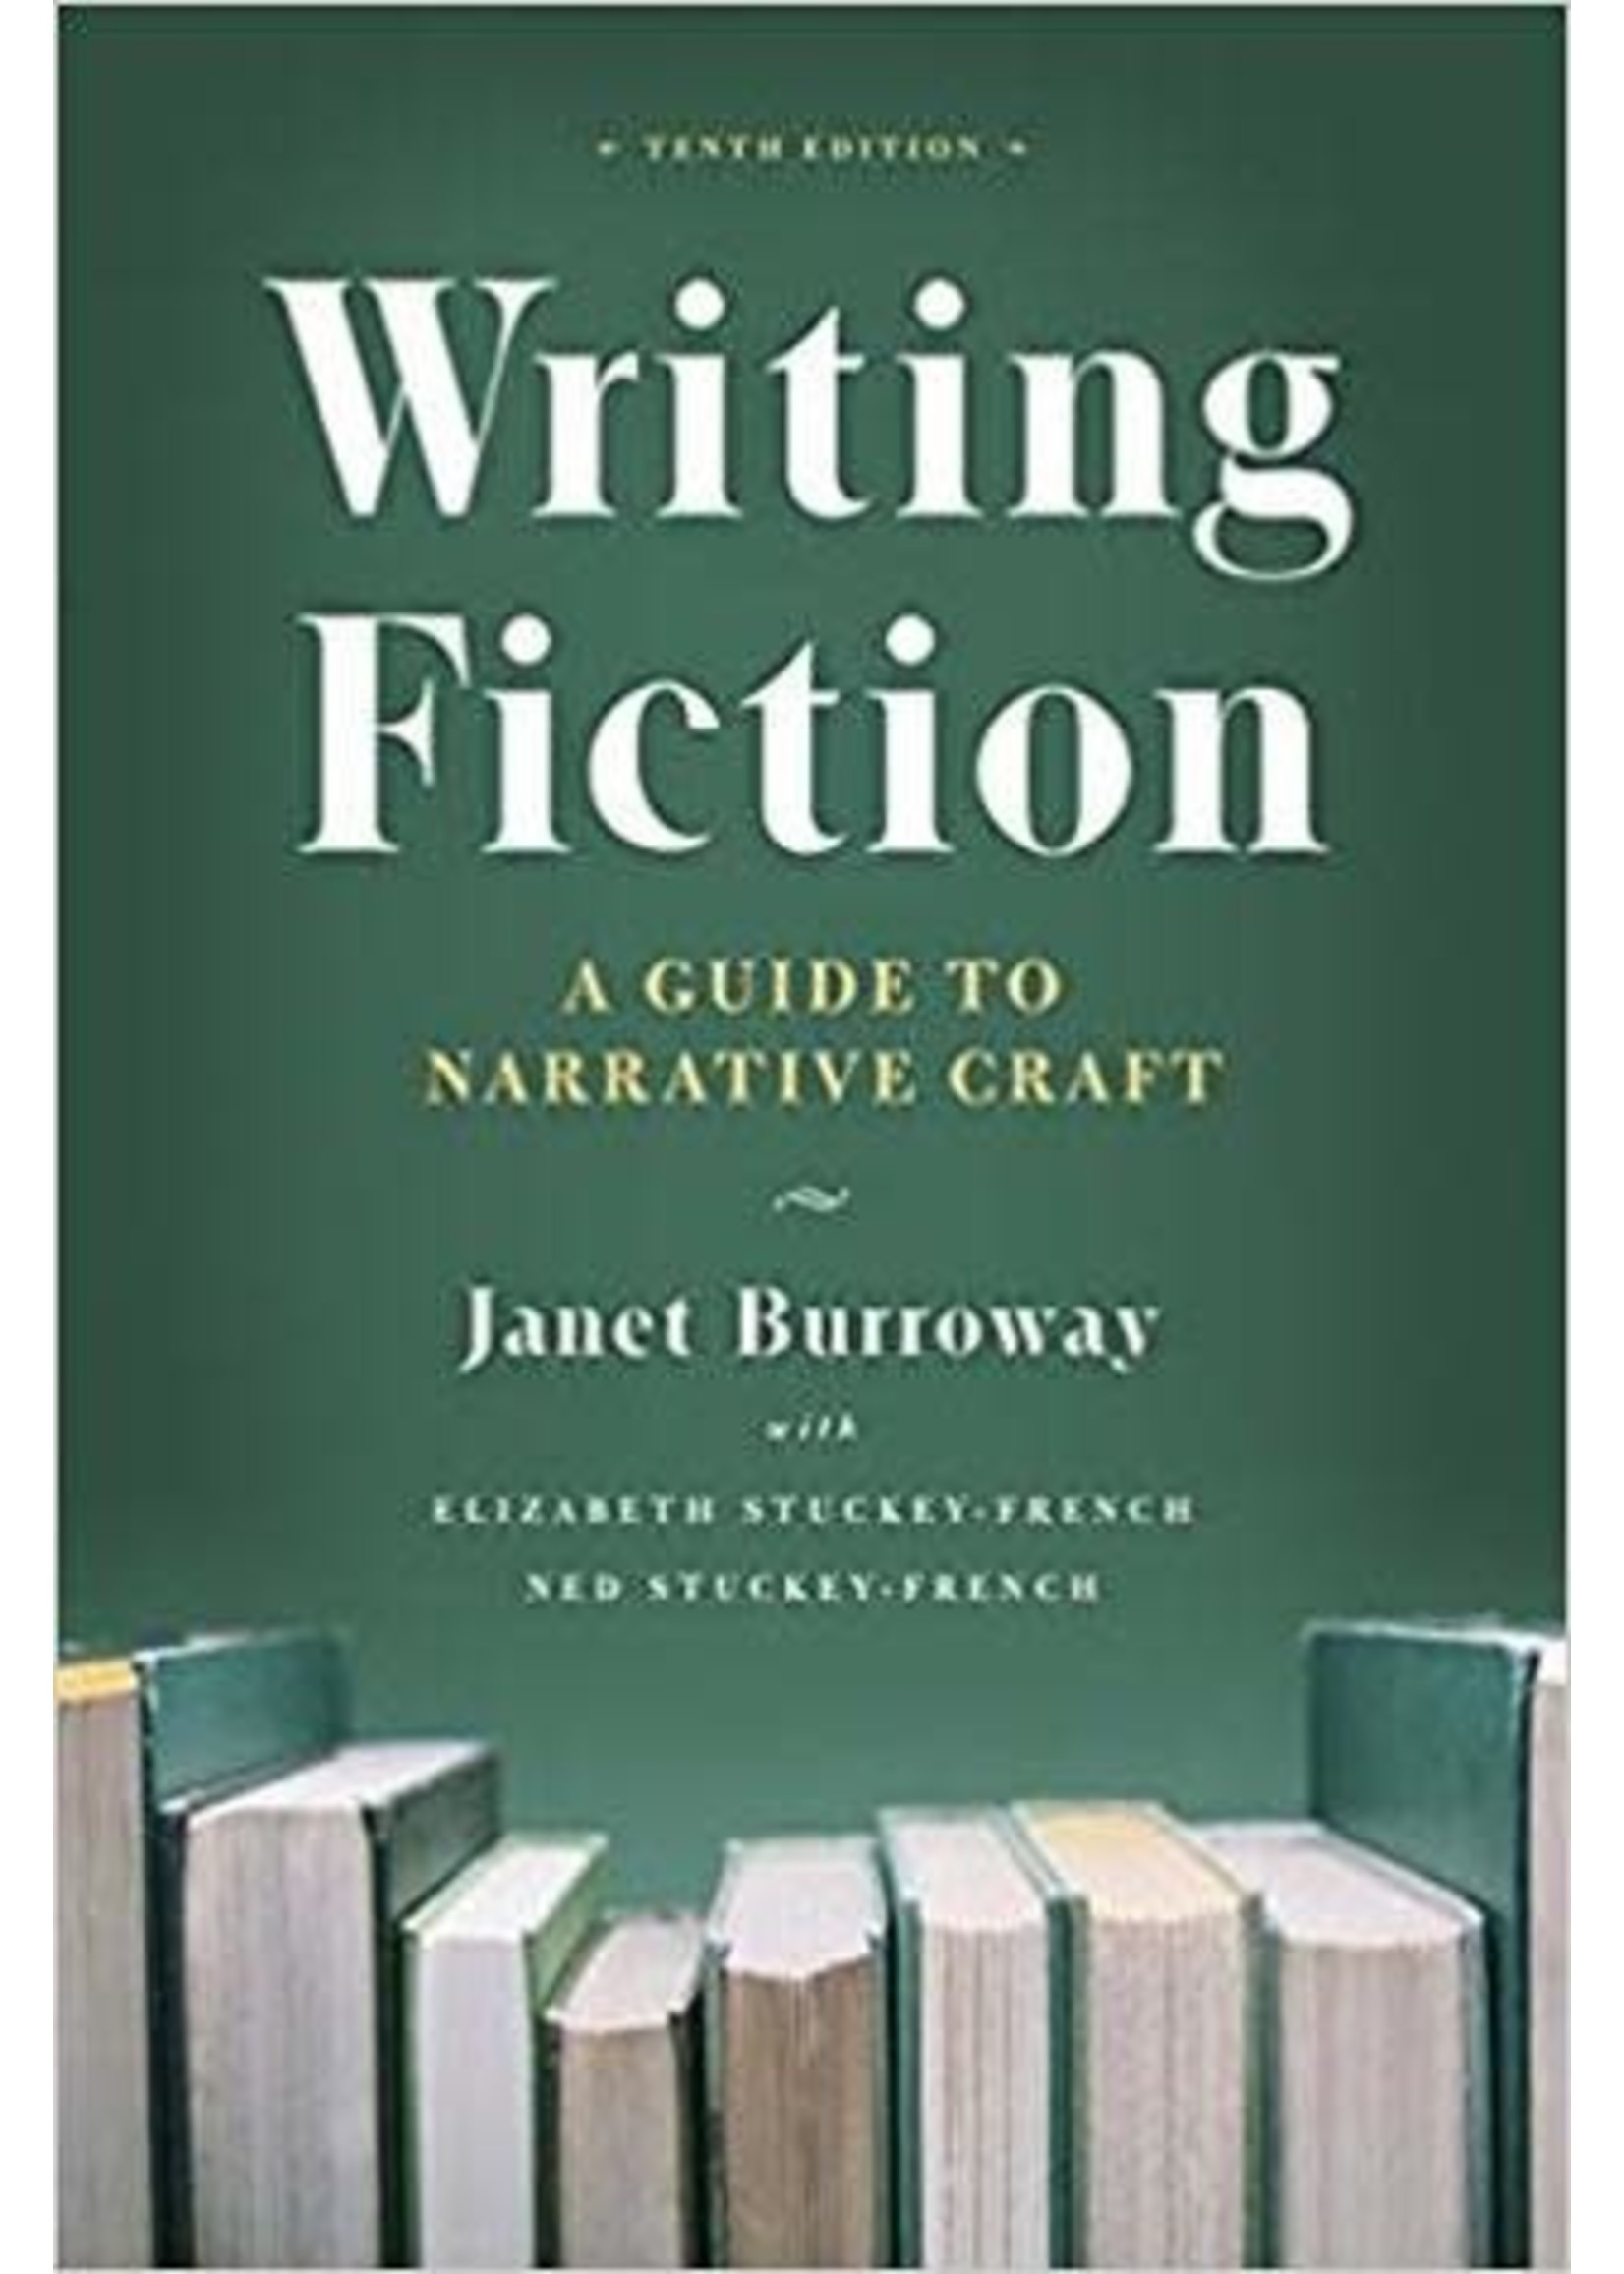 Writing Fiction: A Guide to Narrative Craft by Janet Burroway, Elizabeth Stuckey-French, Ned Stuckey-French